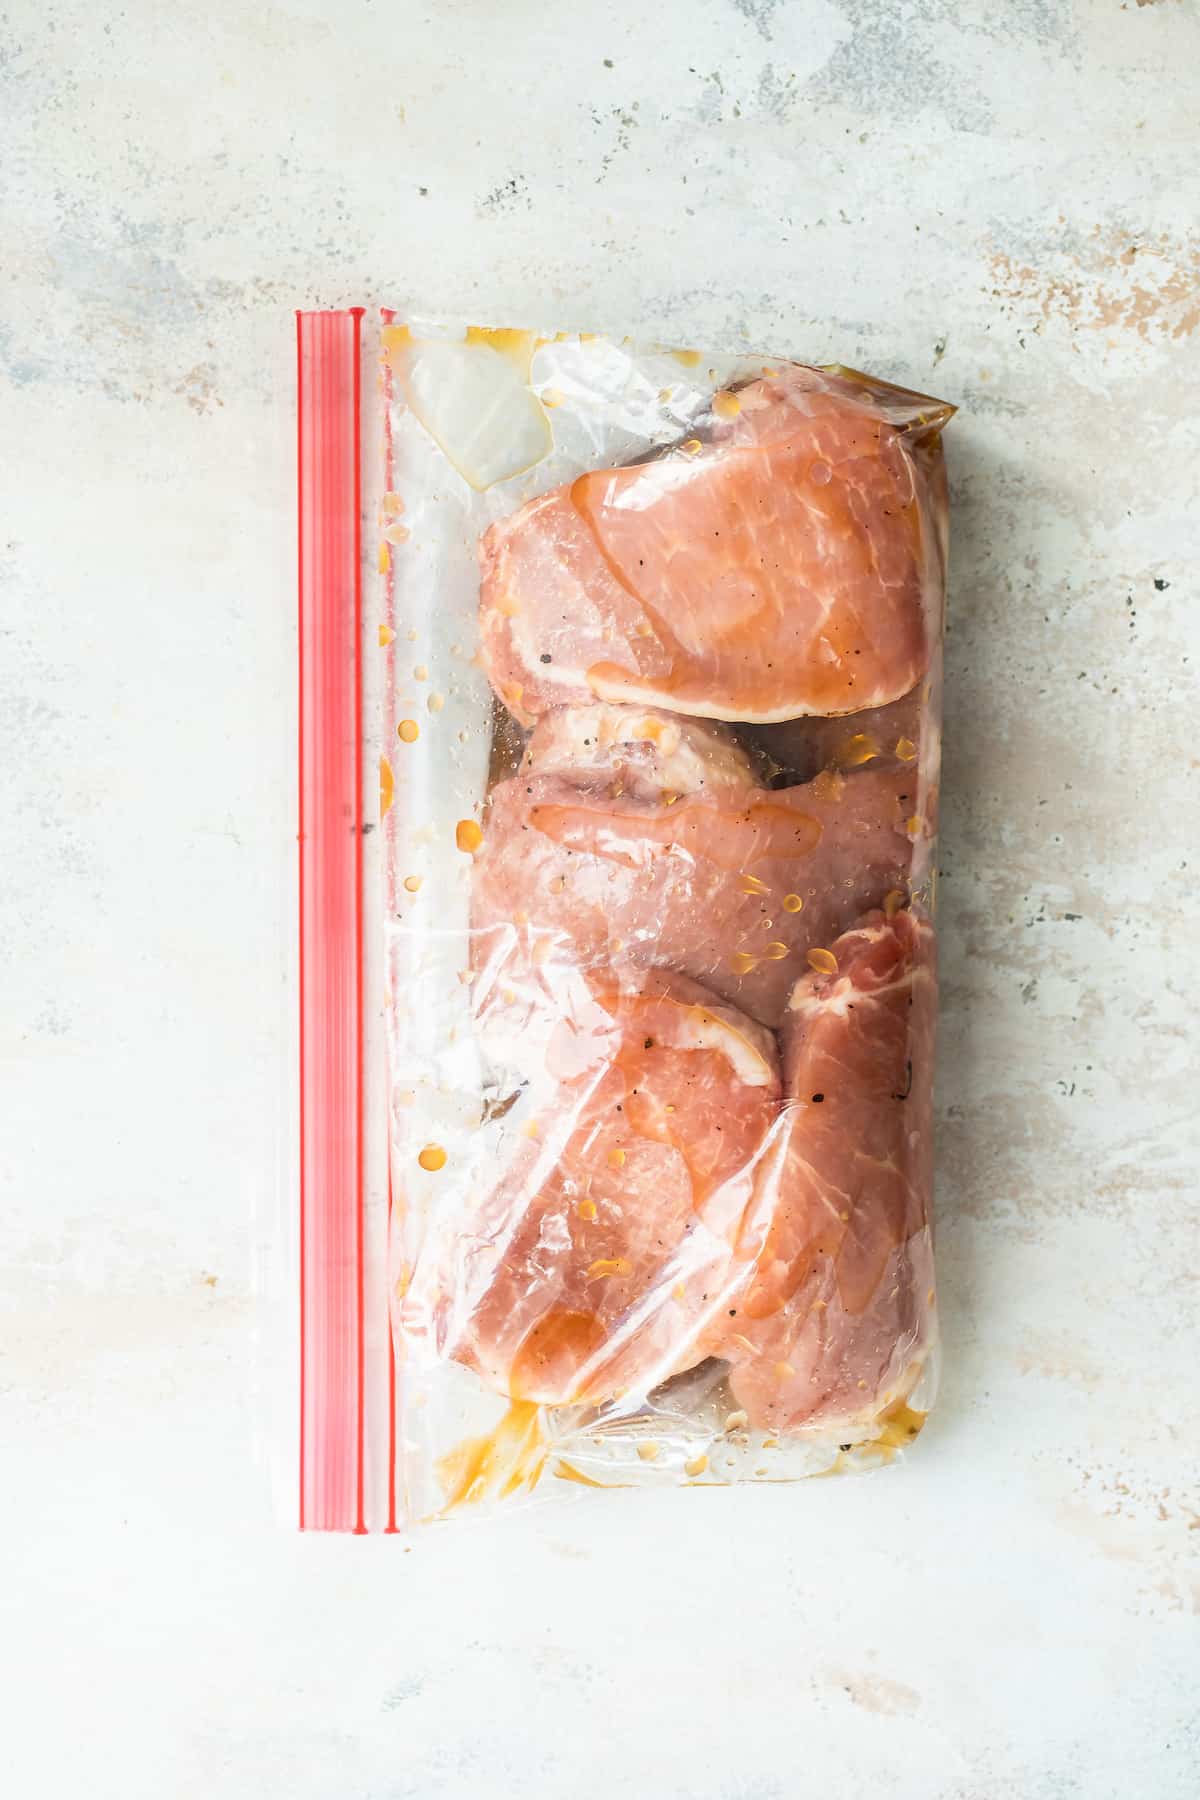 Uncooked Pork Chops Marinating in a Resealable Bag